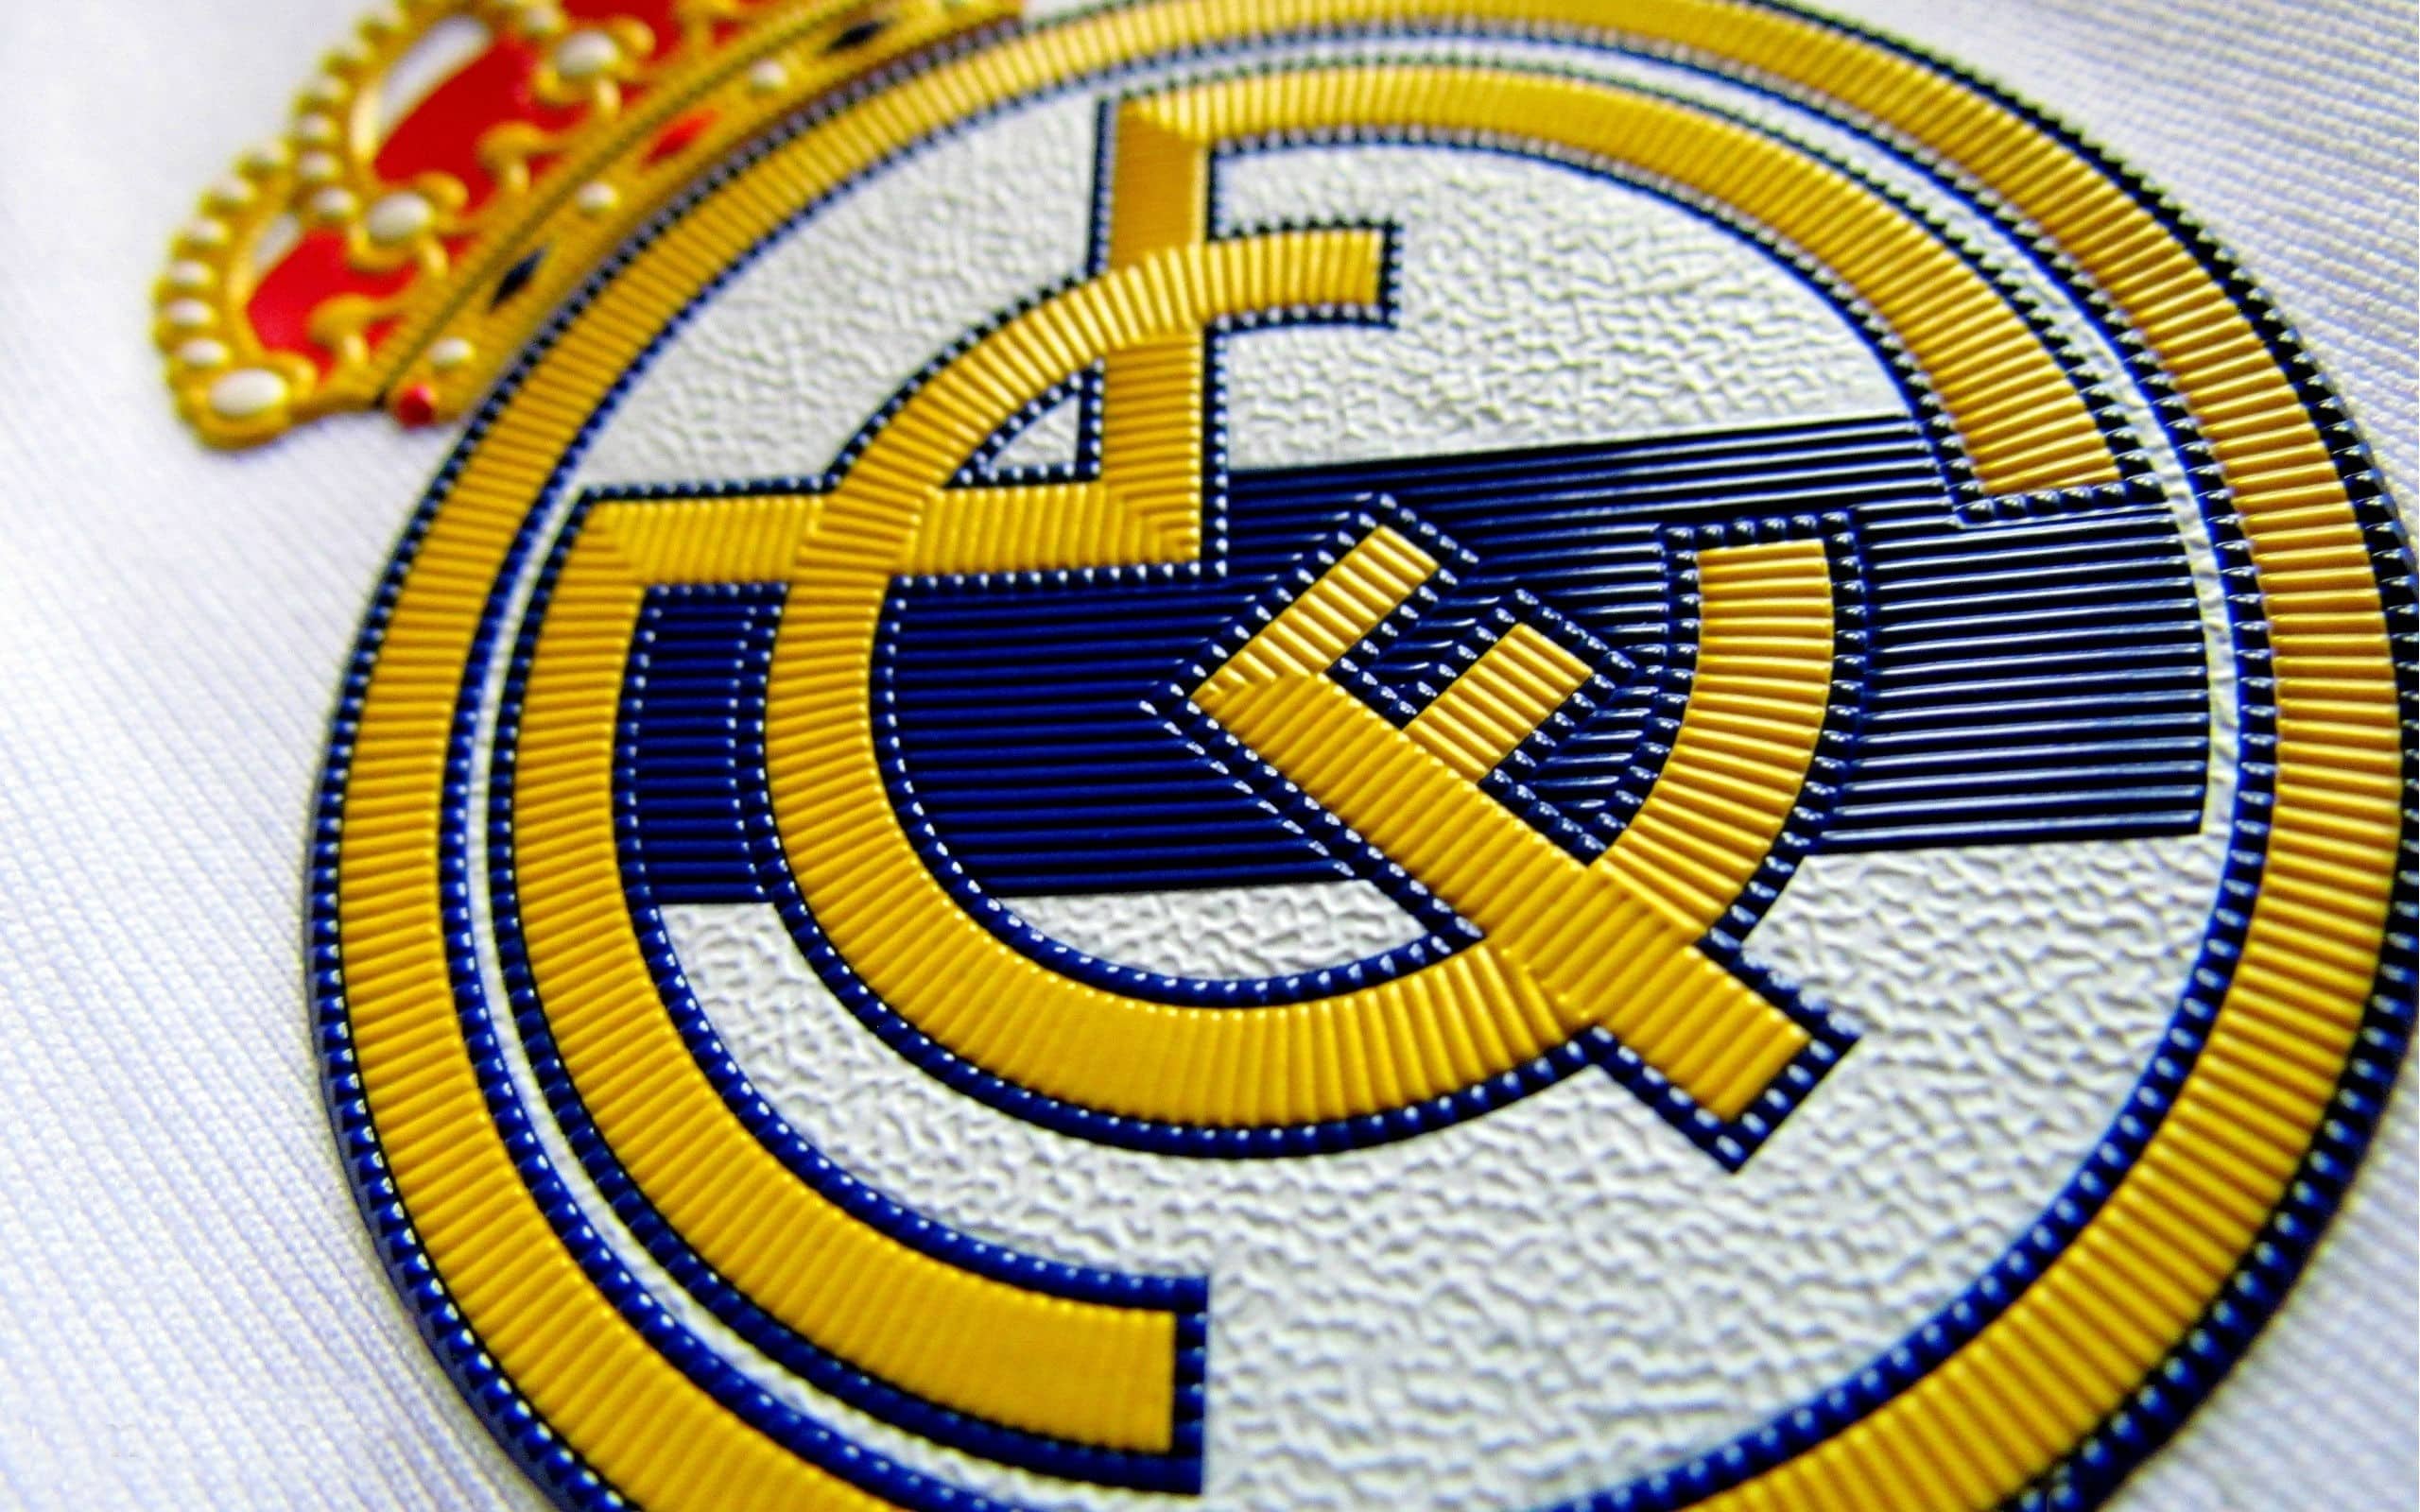 real-madrid-logo - The Busy Buddies